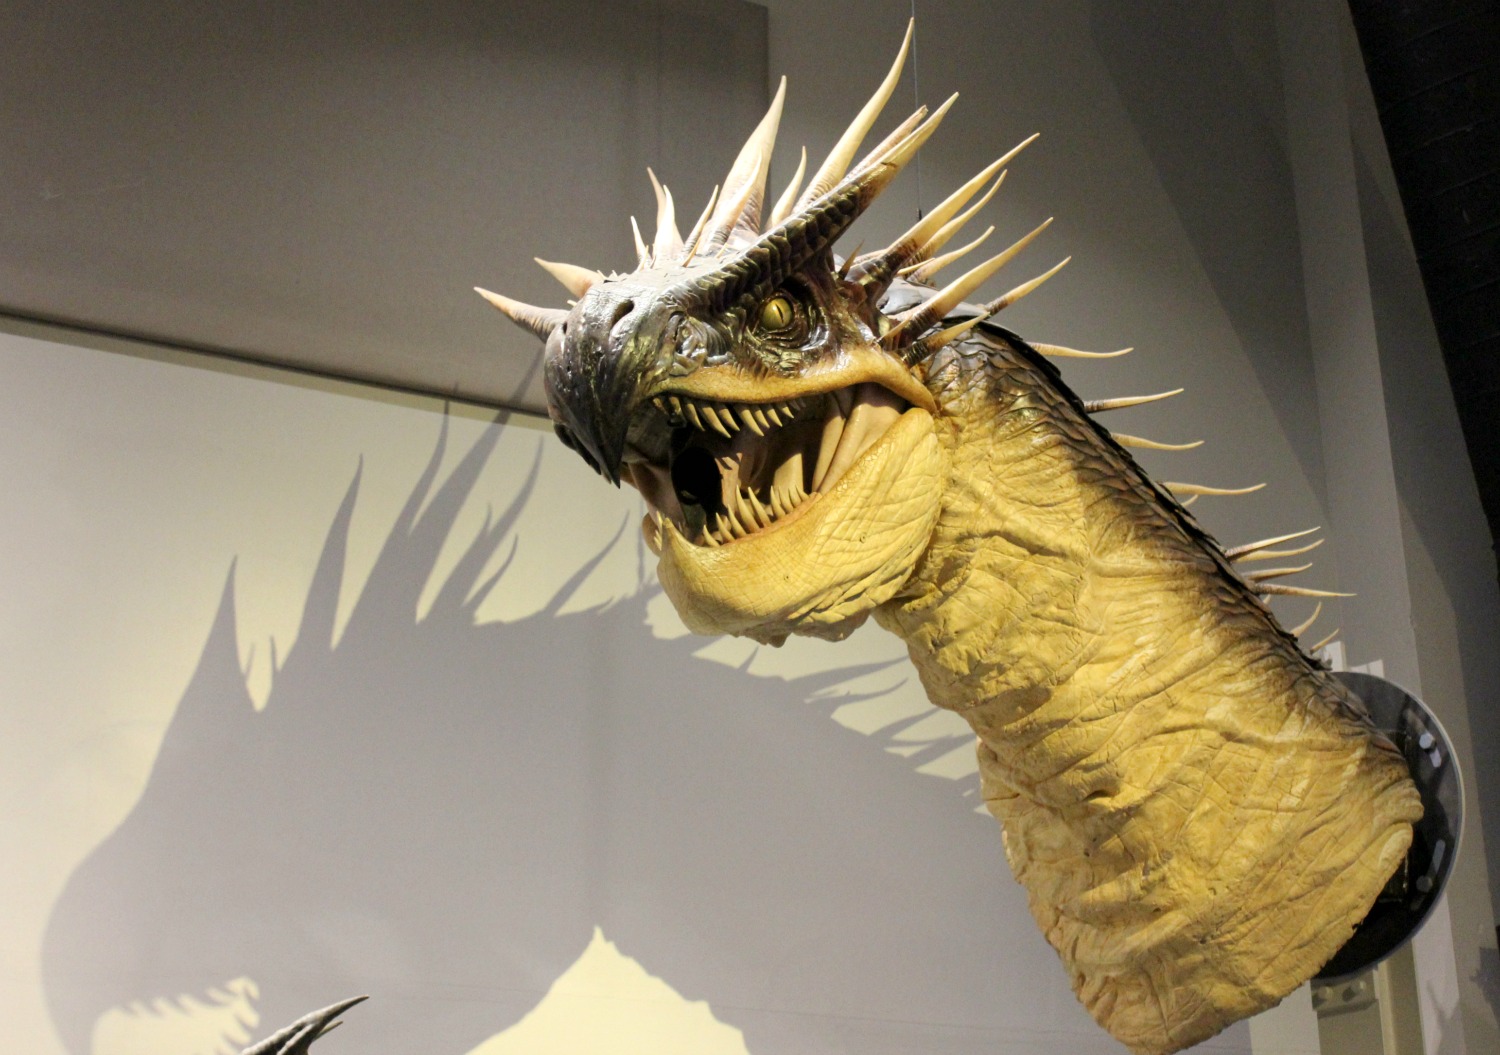 Head of one of the dragon models in the creatures section on the Warner Bros studio tour